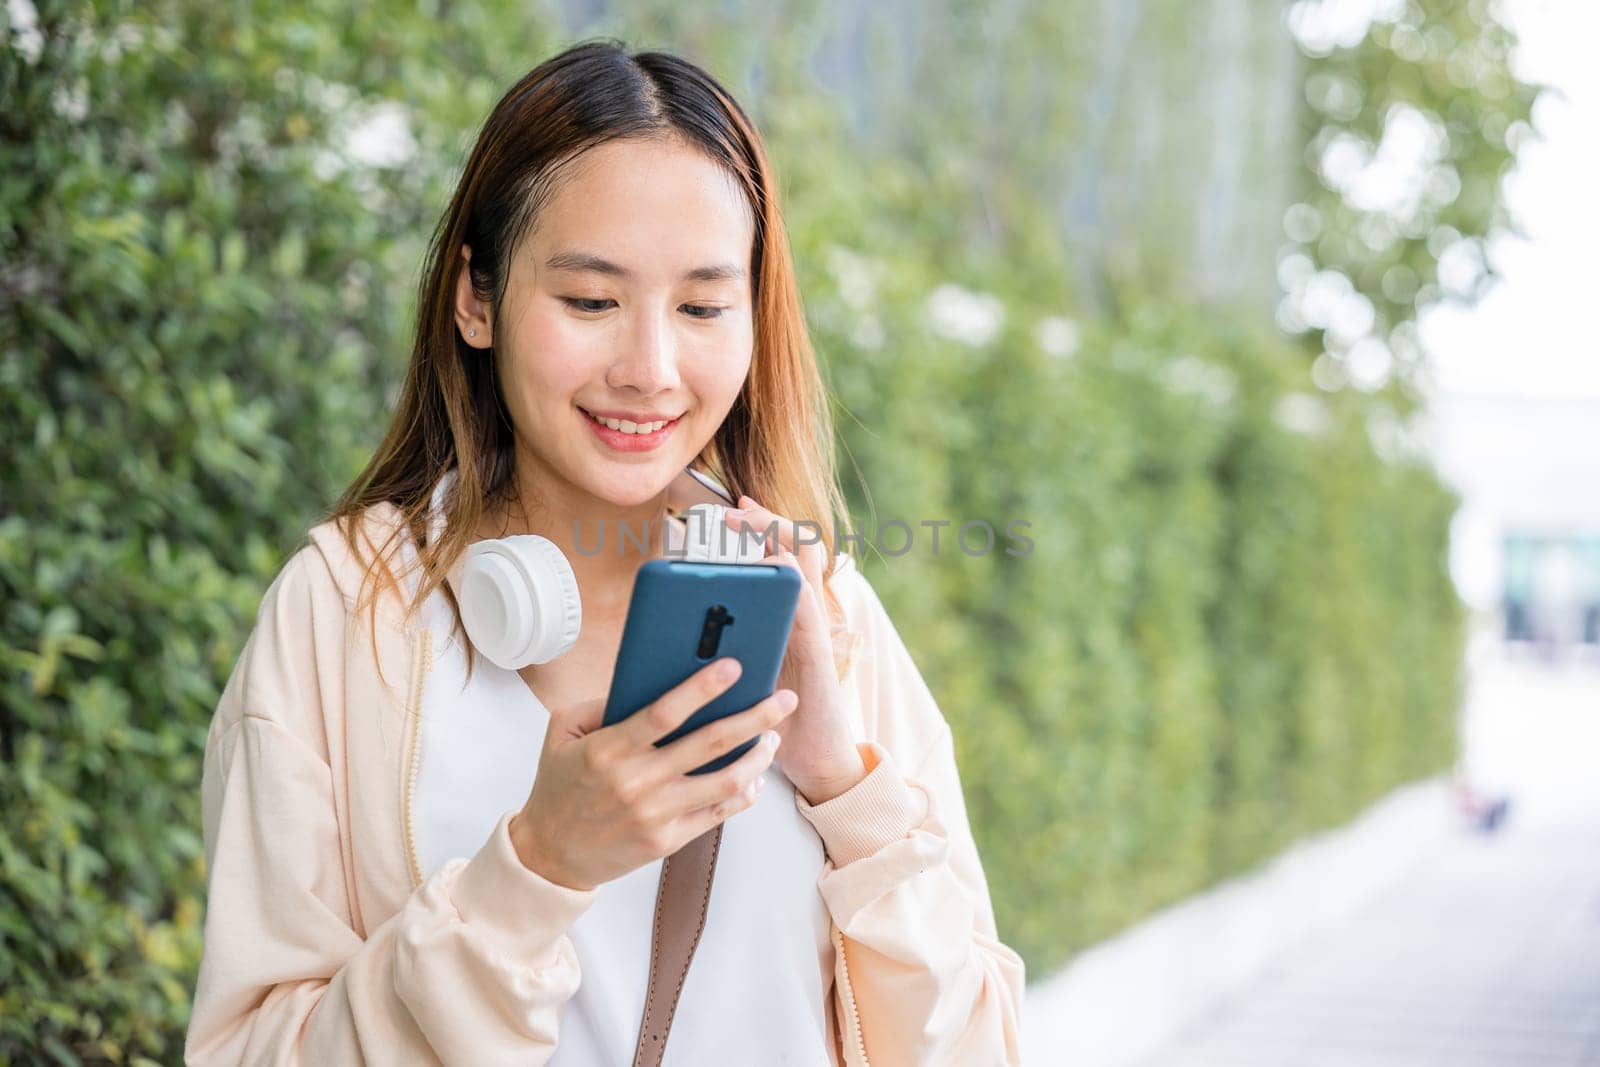 Amidst the beauty of an urban city garden a relaxed young woman uses wireless headphones to choose and listen to her favorite music. Her joyful dance in bright season adds to the vibrant atmosphere.